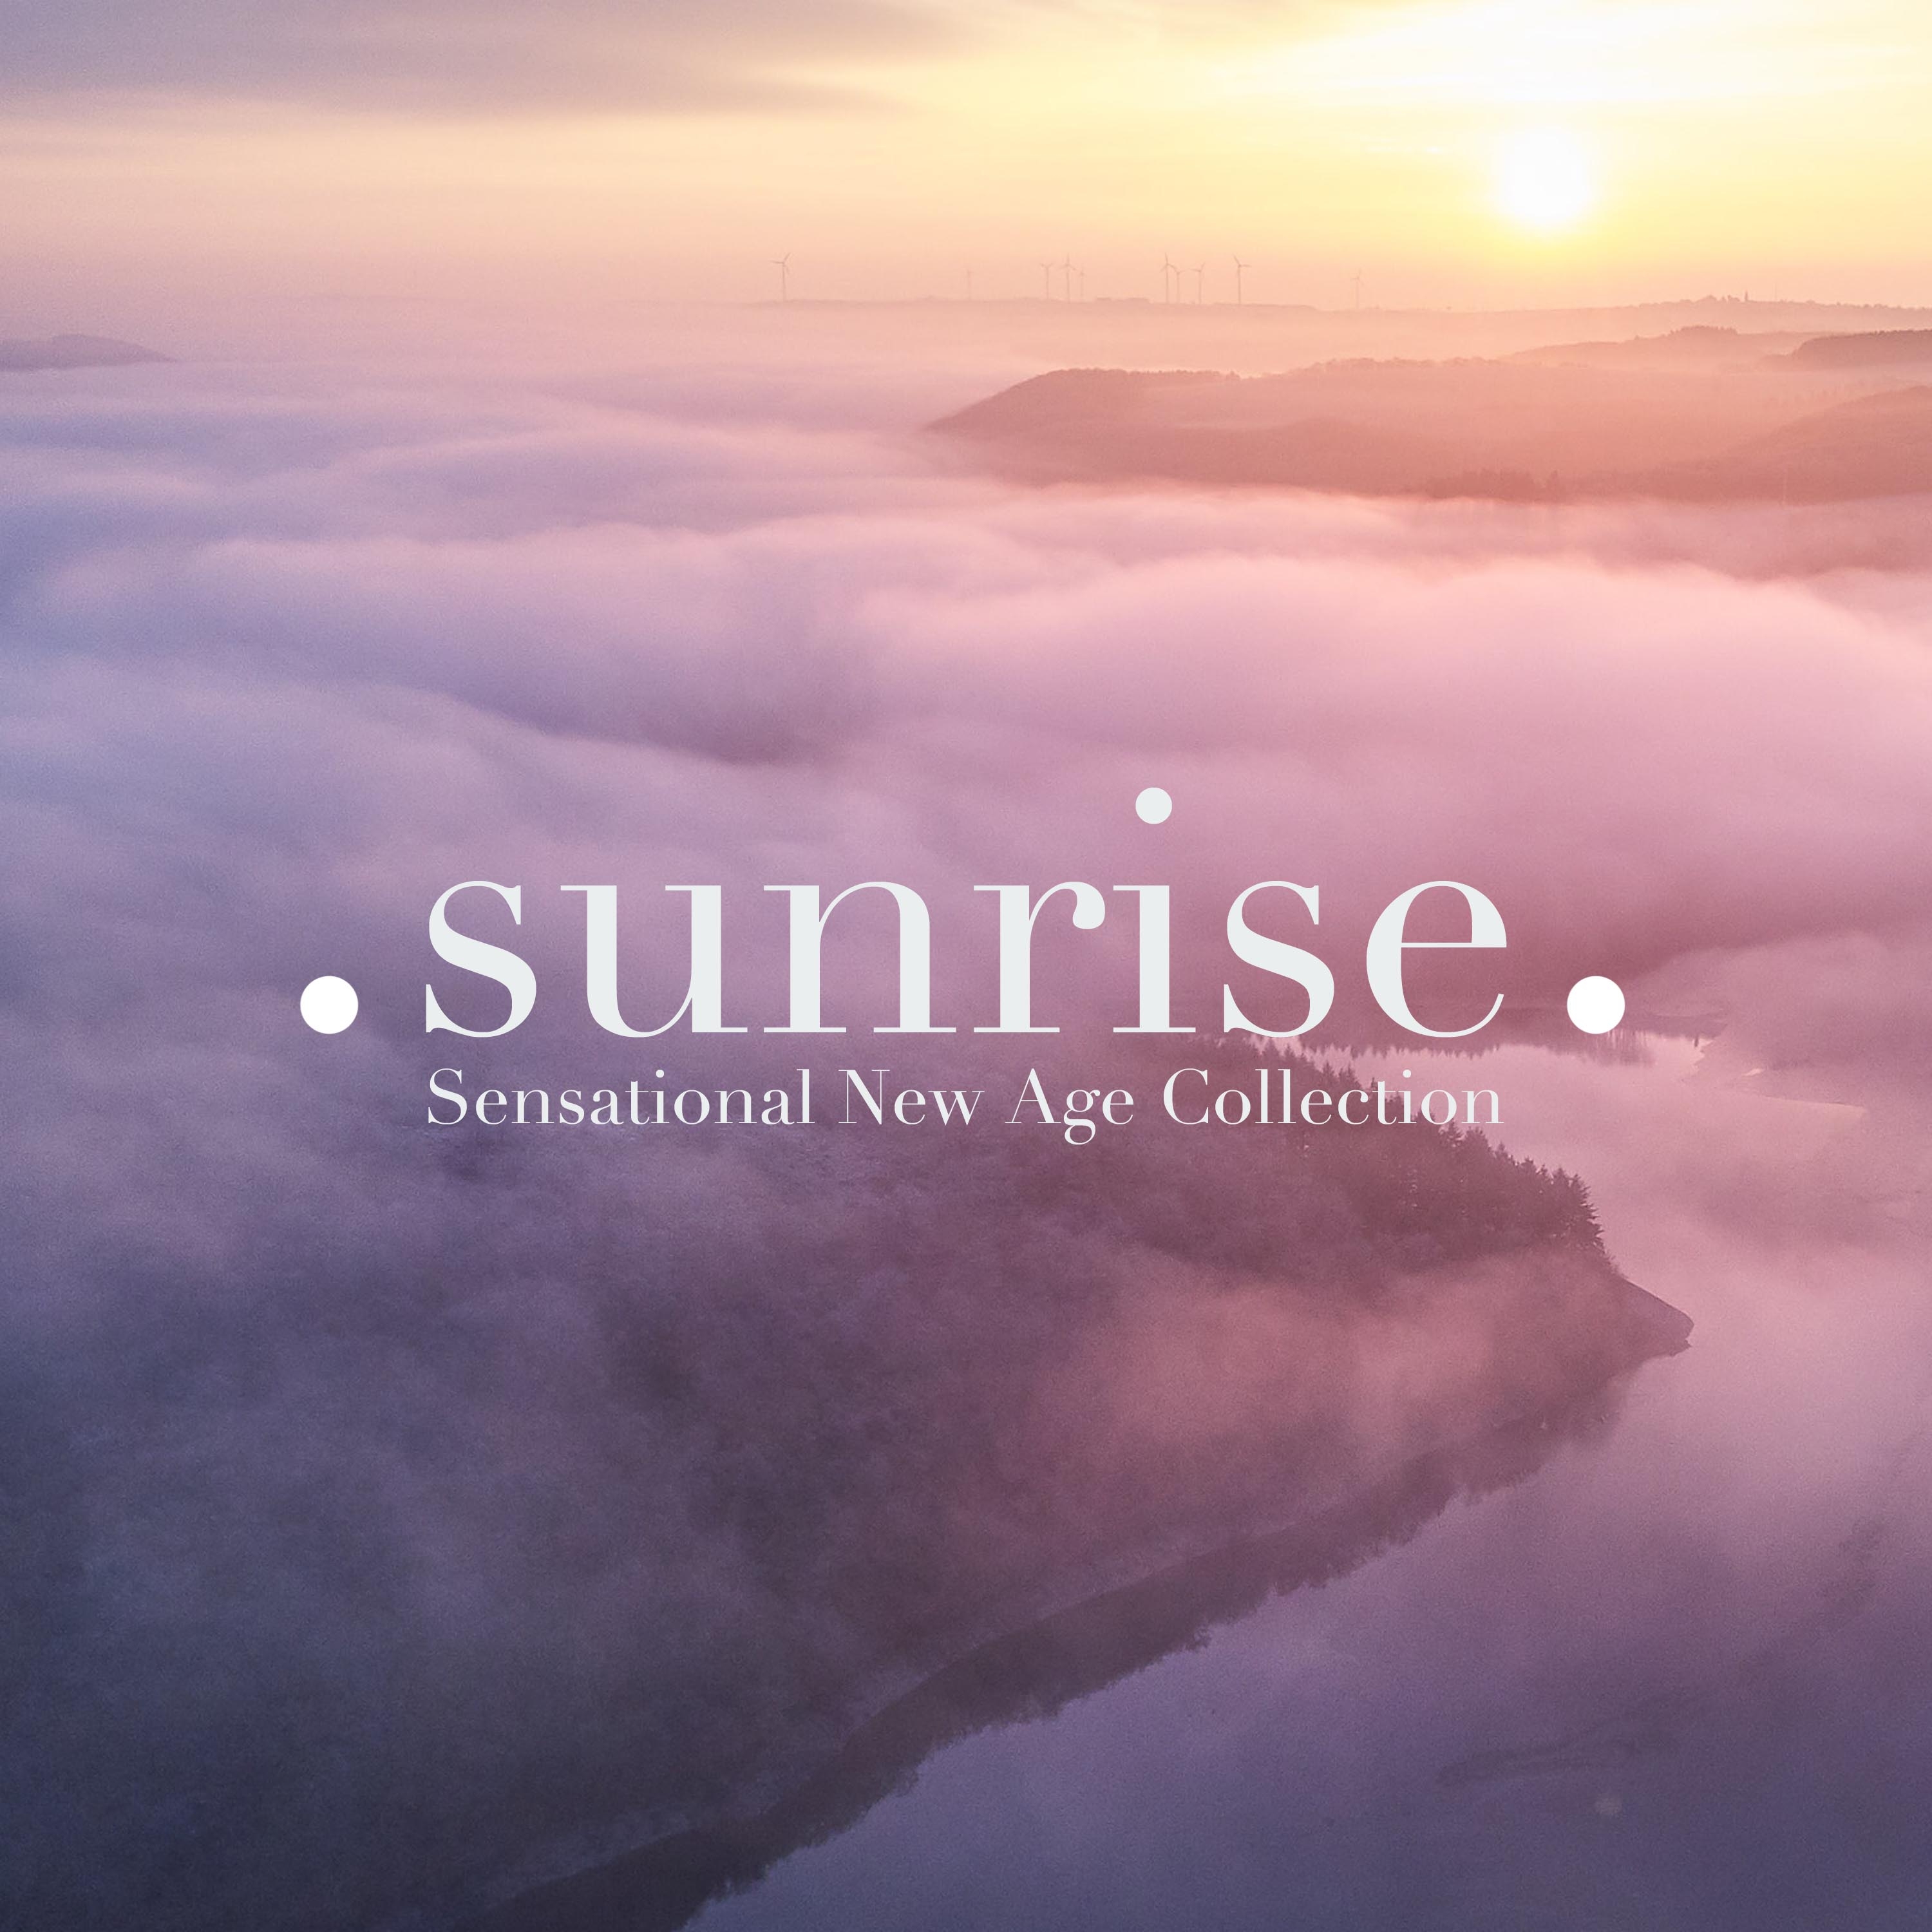 Sunrise - Sensational New Age Collection with the Best Relaxing Music for Relaxation, Meditation, Yoga